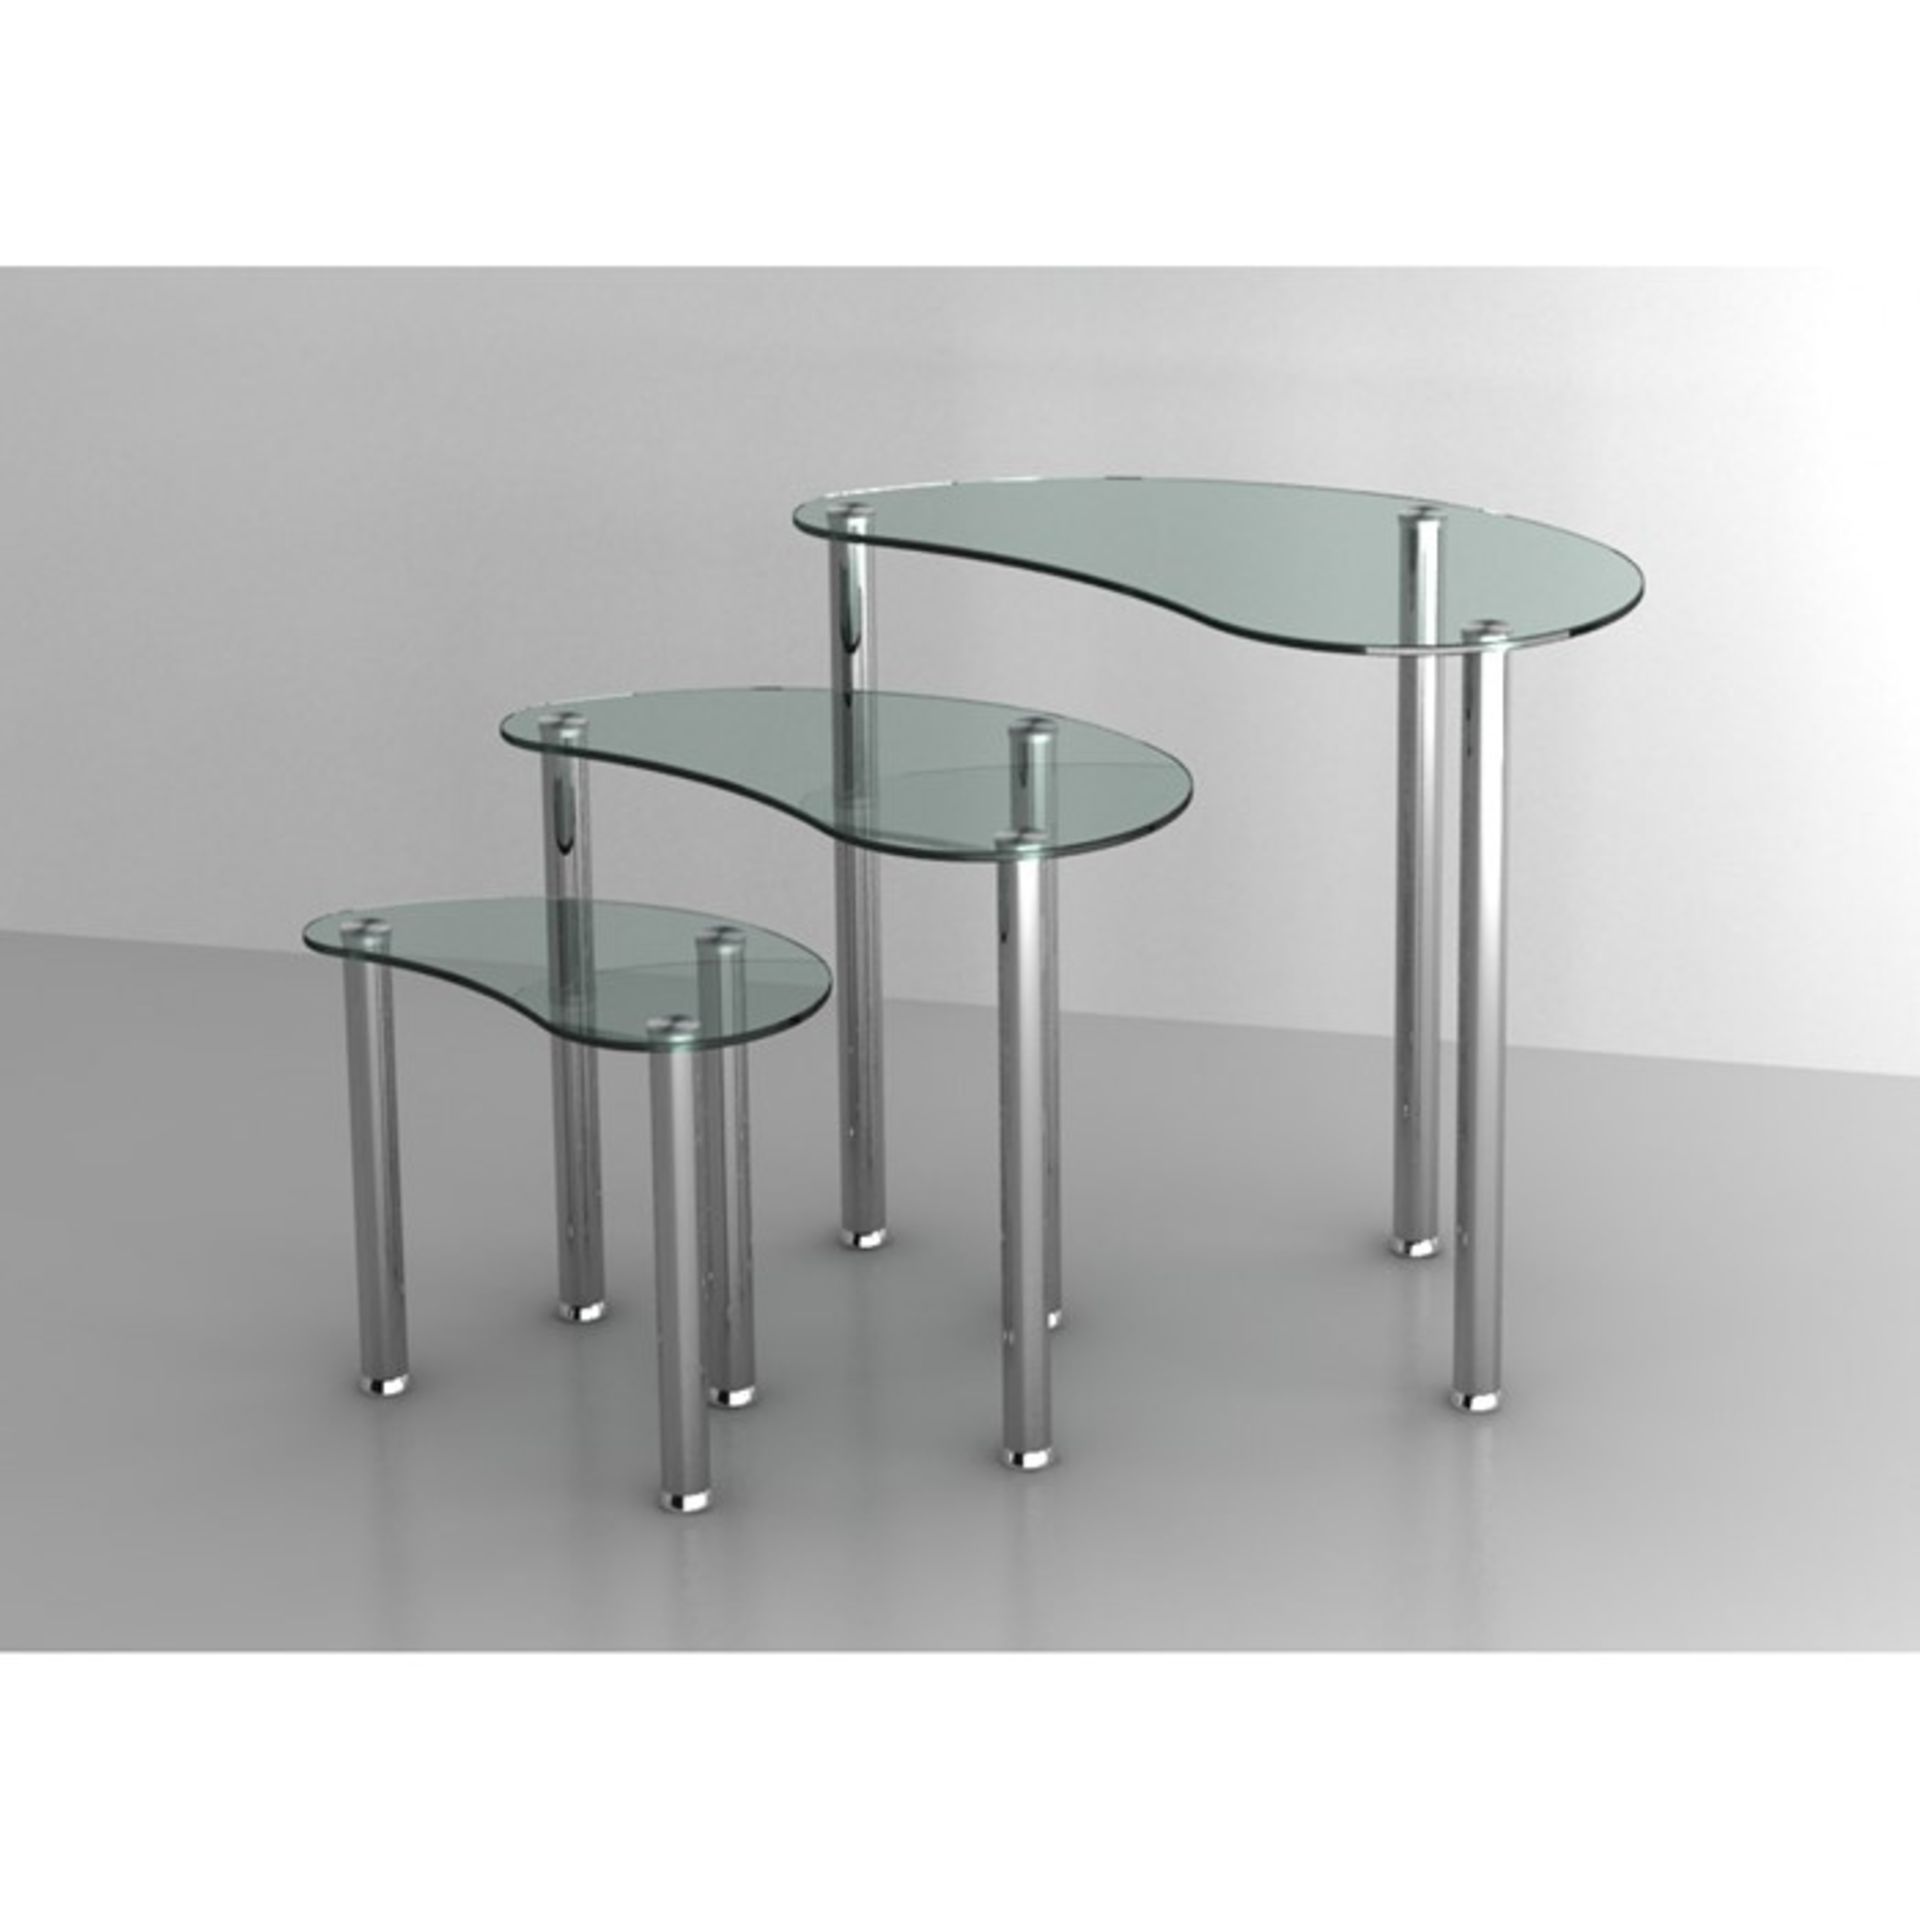 1 BRAND NEW BOXED SET OF THREE TEAR SHAPED NESTING TABLES IN CLEAR GLASS AND CHROME / BST008CLR